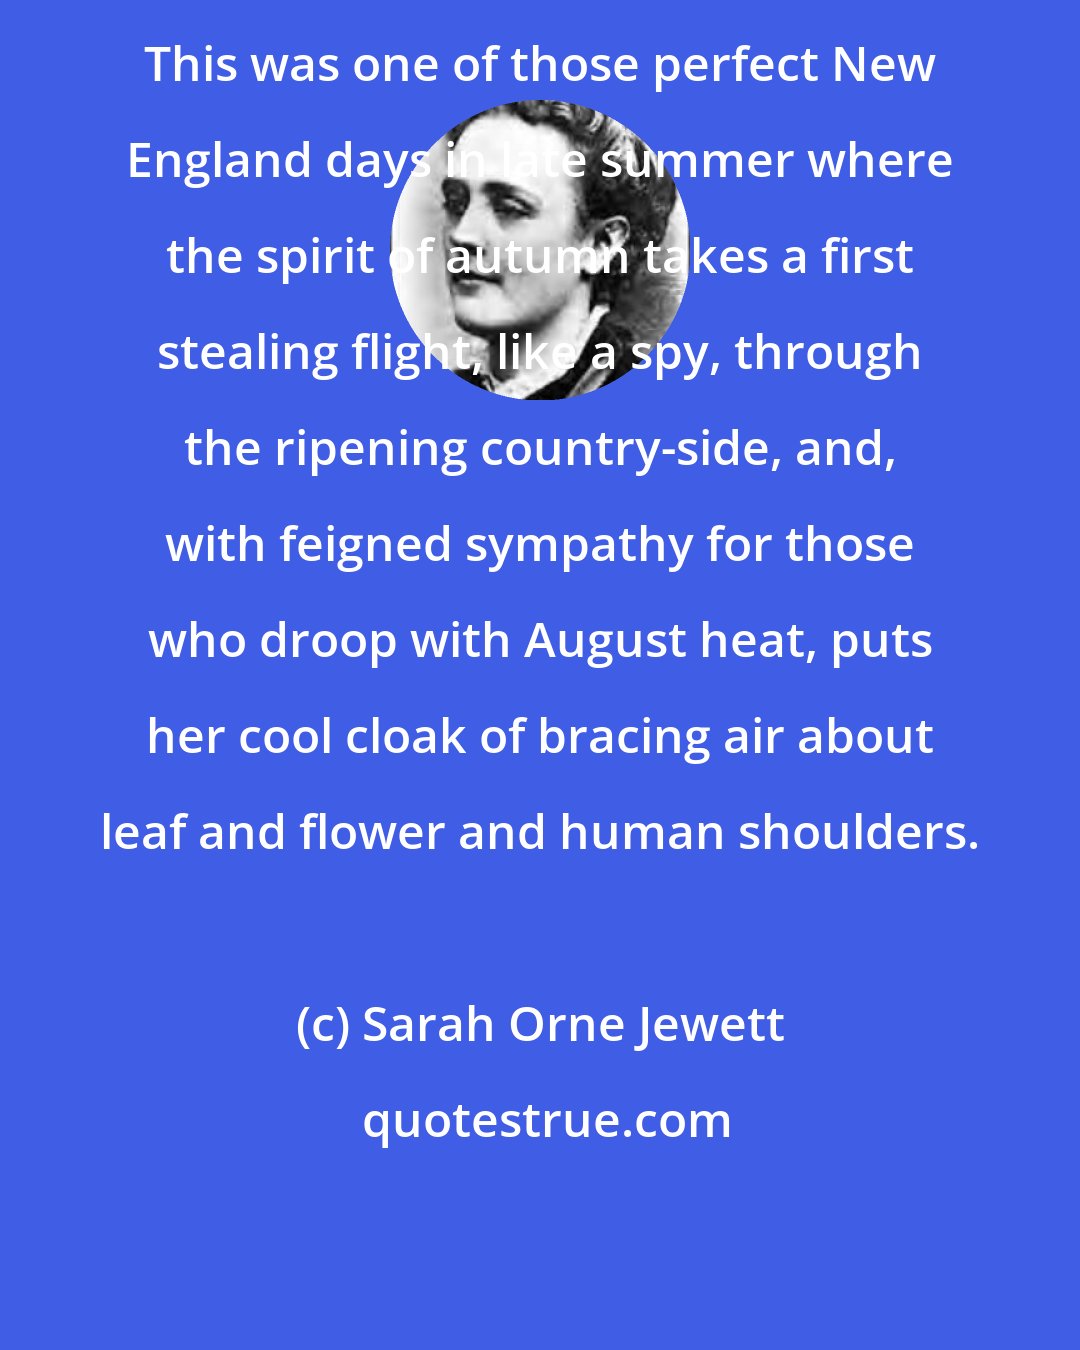 Sarah Orne Jewett: This was one of those perfect New England days in late summer where the spirit of autumn takes a first stealing flight, like a spy, through the ripening country-side, and, with feigned sympathy for those who droop with August heat, puts her cool cloak of bracing air about leaf and flower and human shoulders.